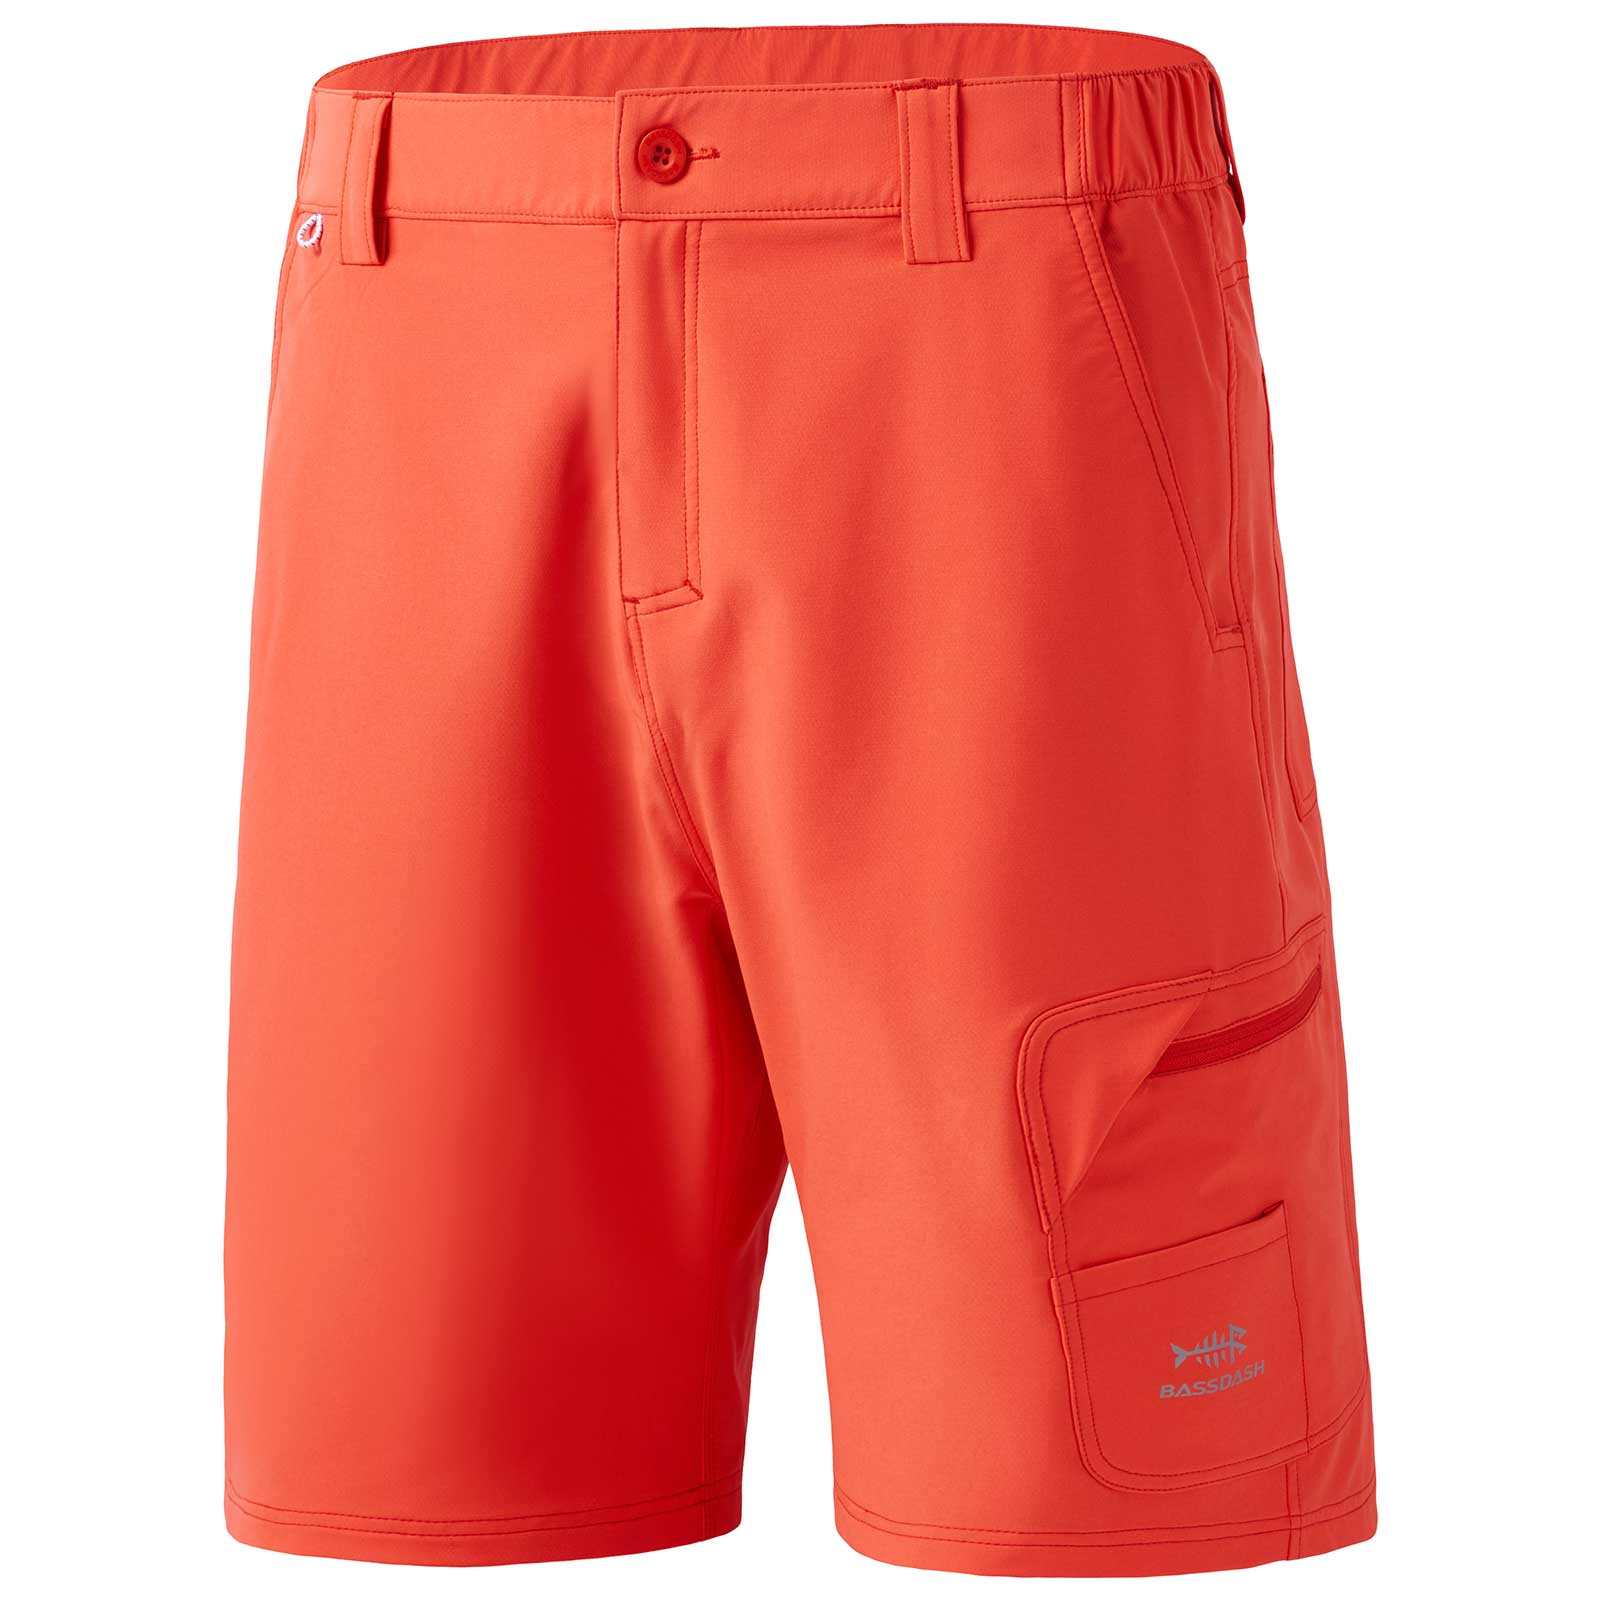 Men's UPF 50+ 10.5” Cargo Shorts Quick Dry Water Resistant FP01M, Coral Red / S (30-32)W x 10.5L